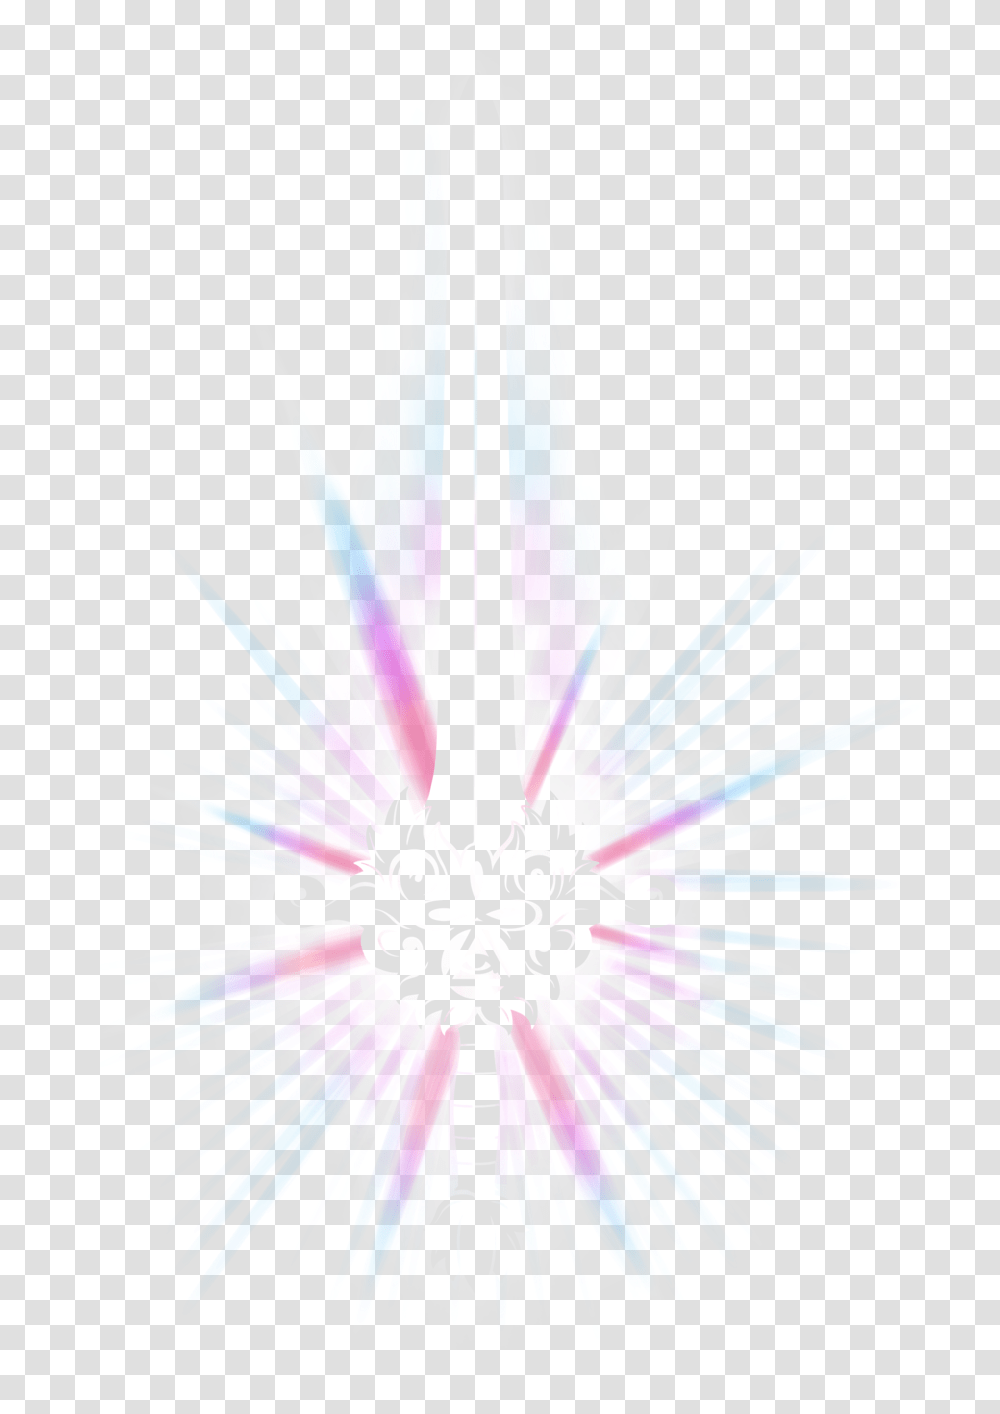 Download Free 15 Magic Burst Parallel, Graphics, Art, Weapon, Weaponry Transparent Png